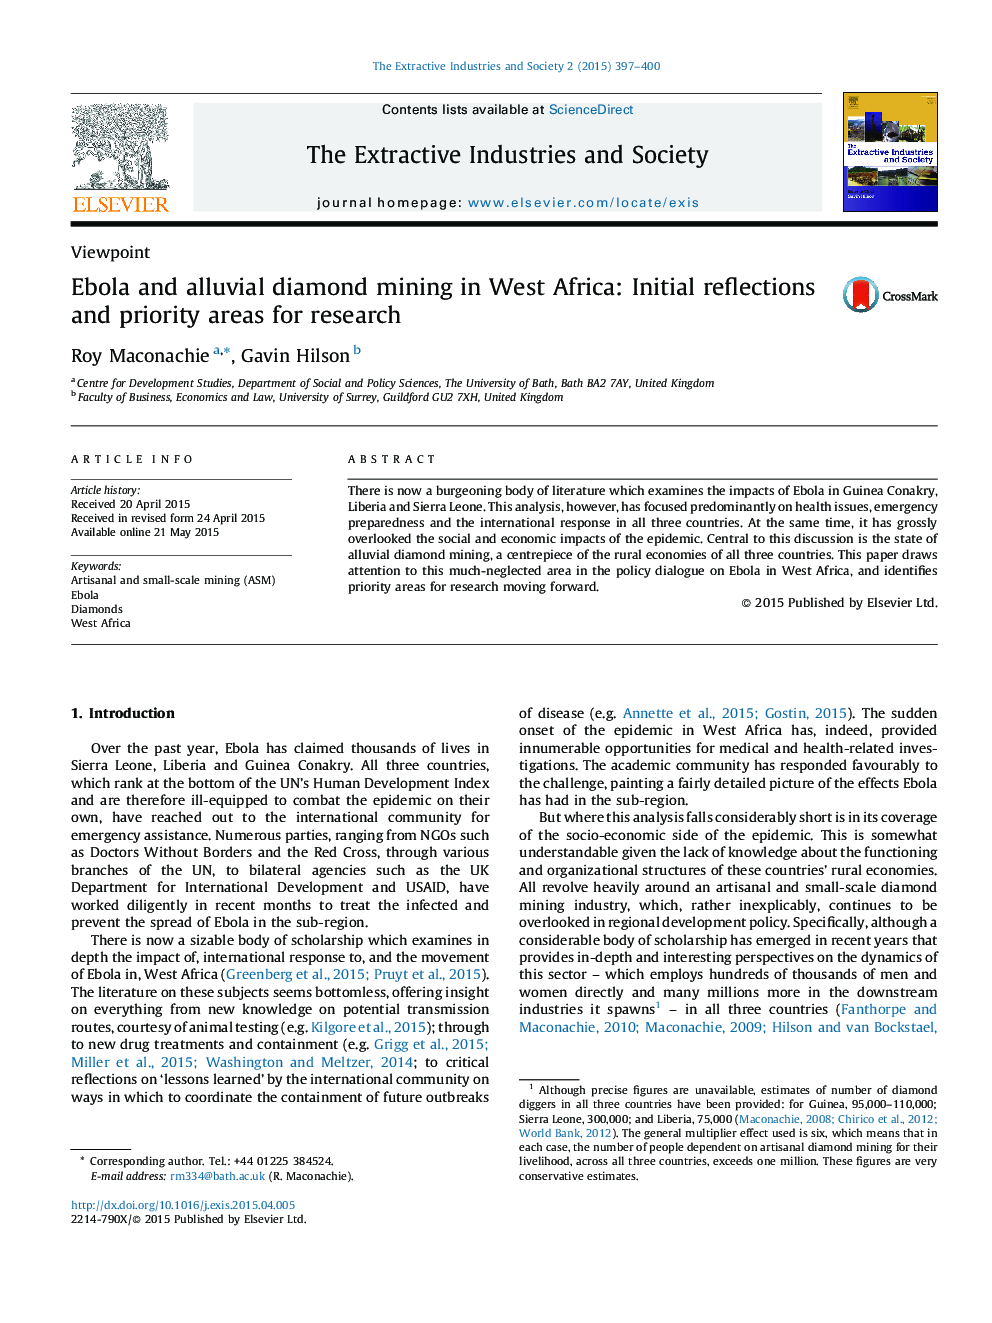 Ebola and alluvial diamond mining in West Africa: Initial reflections and priority areas for research